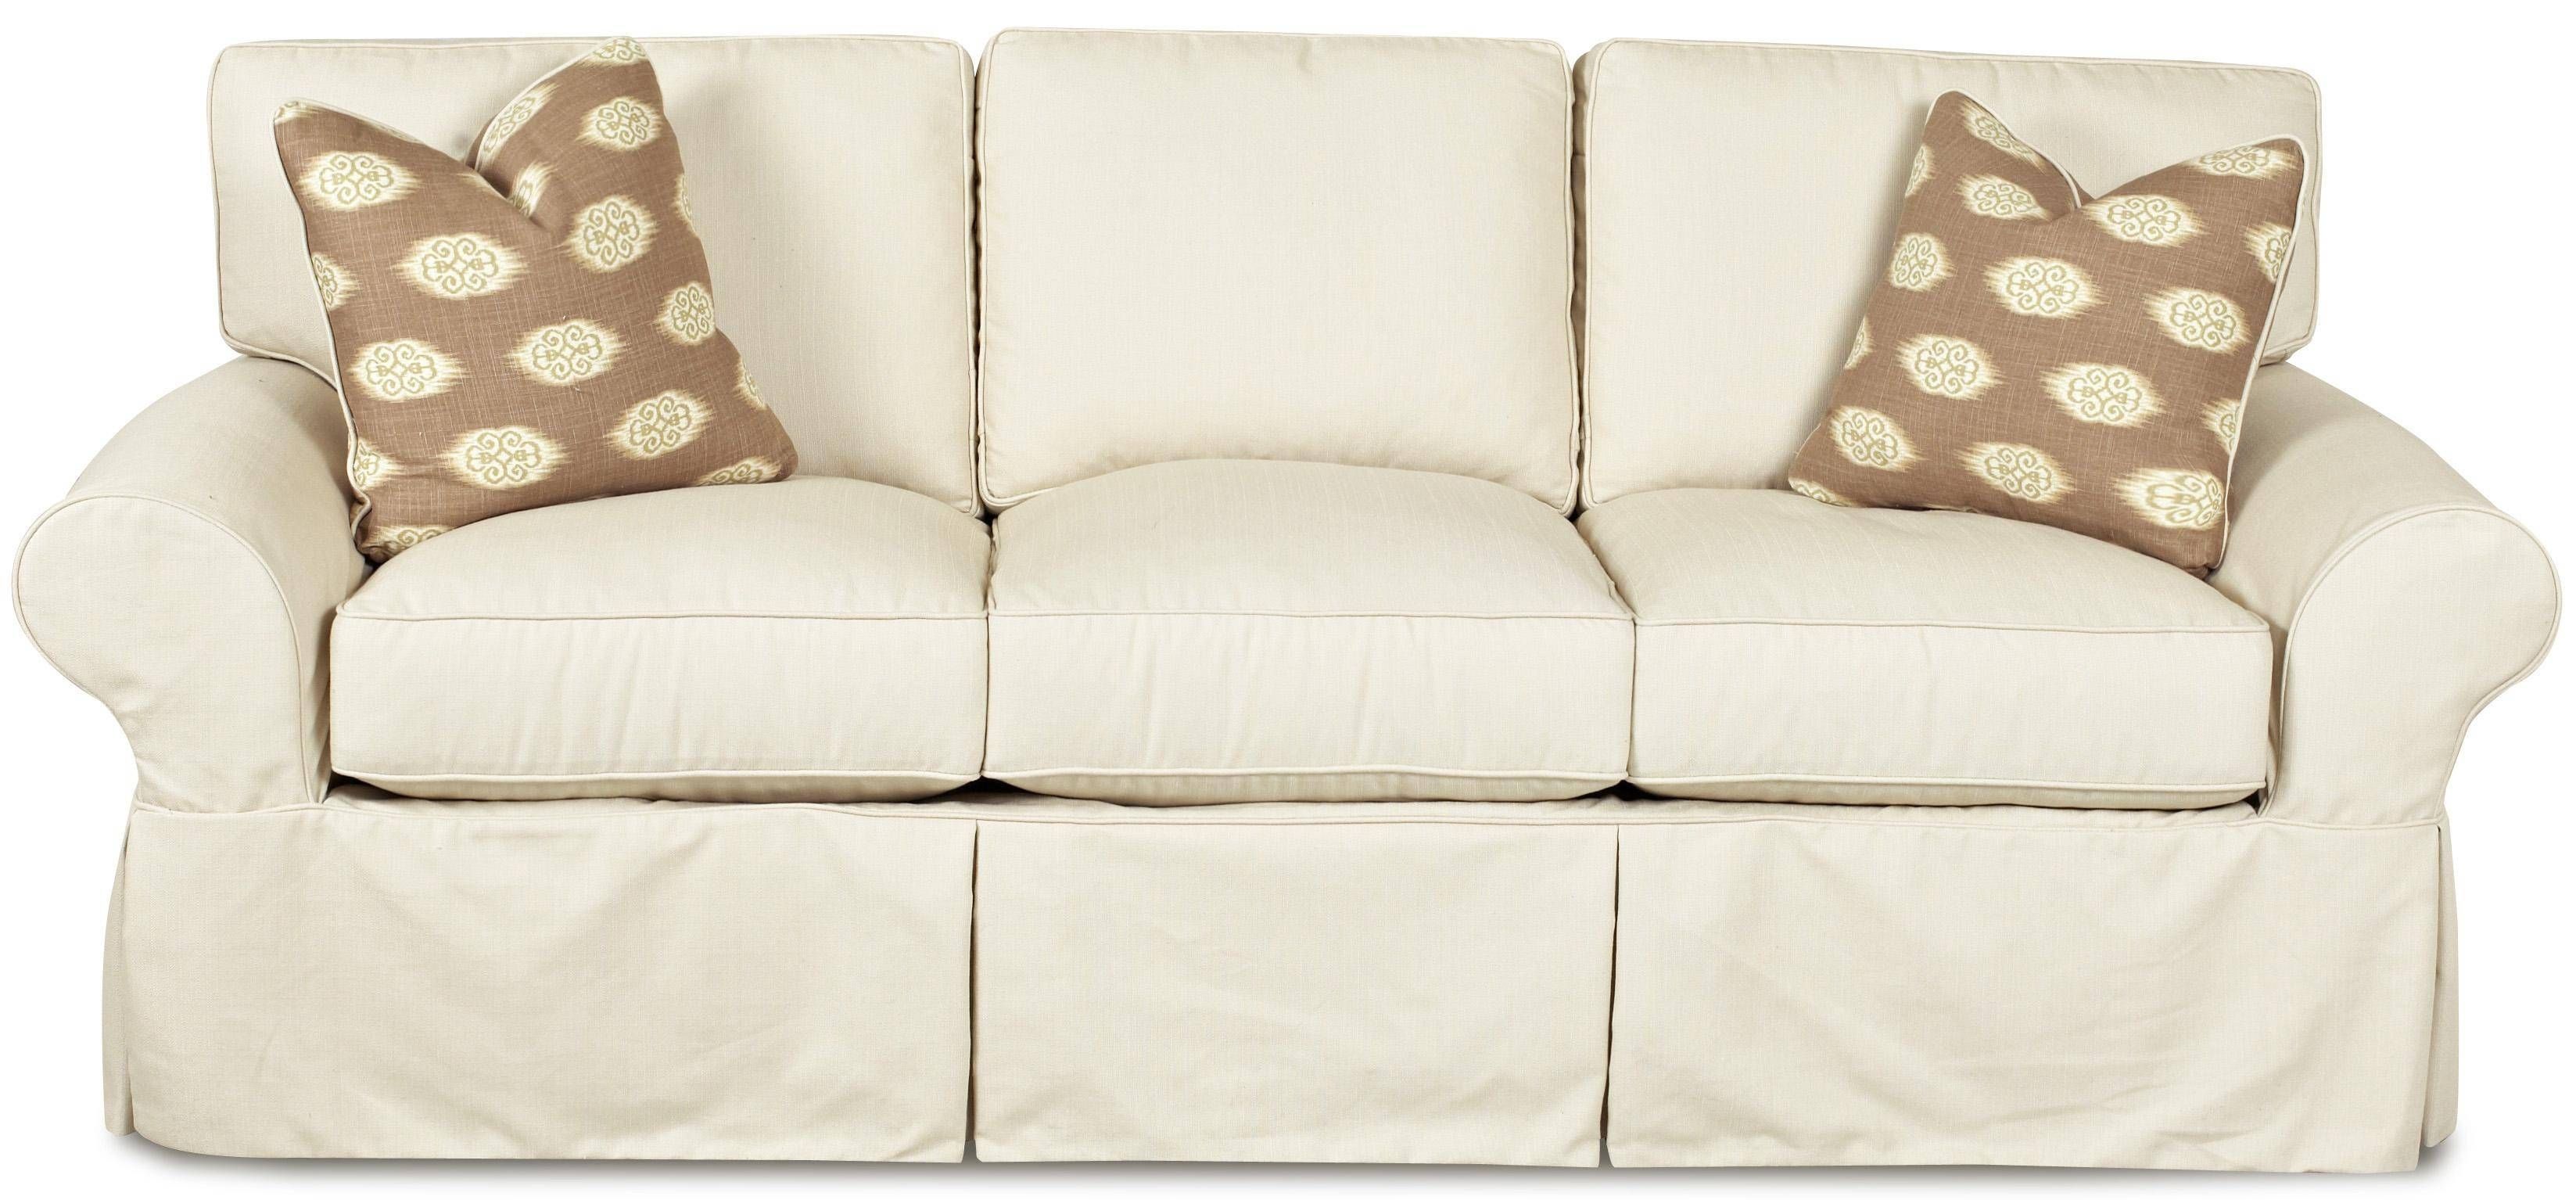 Furniture: Perfect Living Room With Sofa Slipcovers Walmart For Regarding Walmart Slipcovers For Sofas (View 19 of 30)